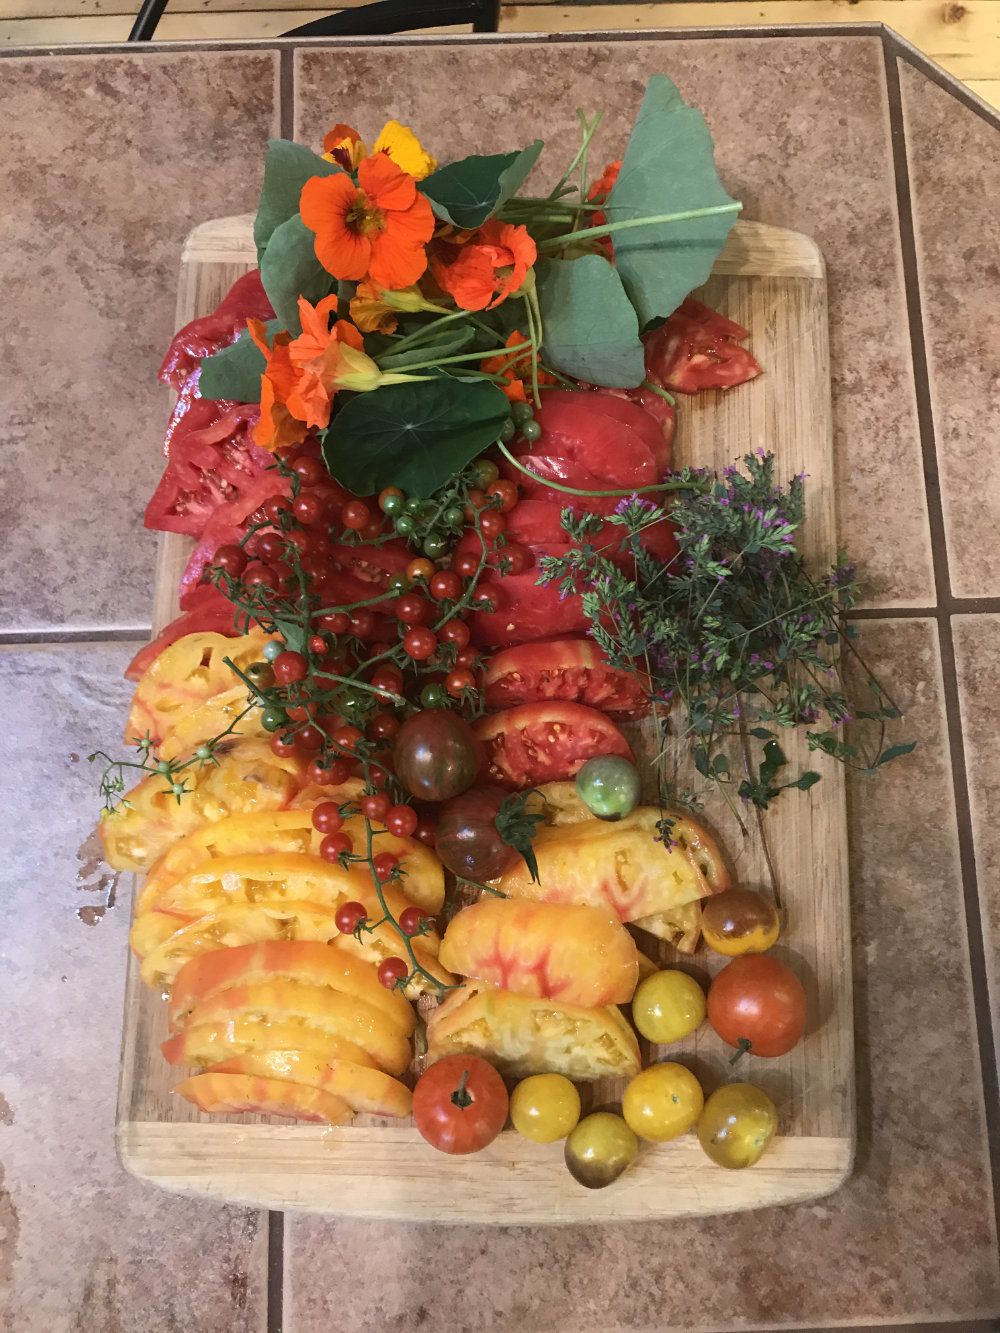 Gorgeous red, yellow, and orange colored home grown heirloom tomatoes are cut and served on a tray.